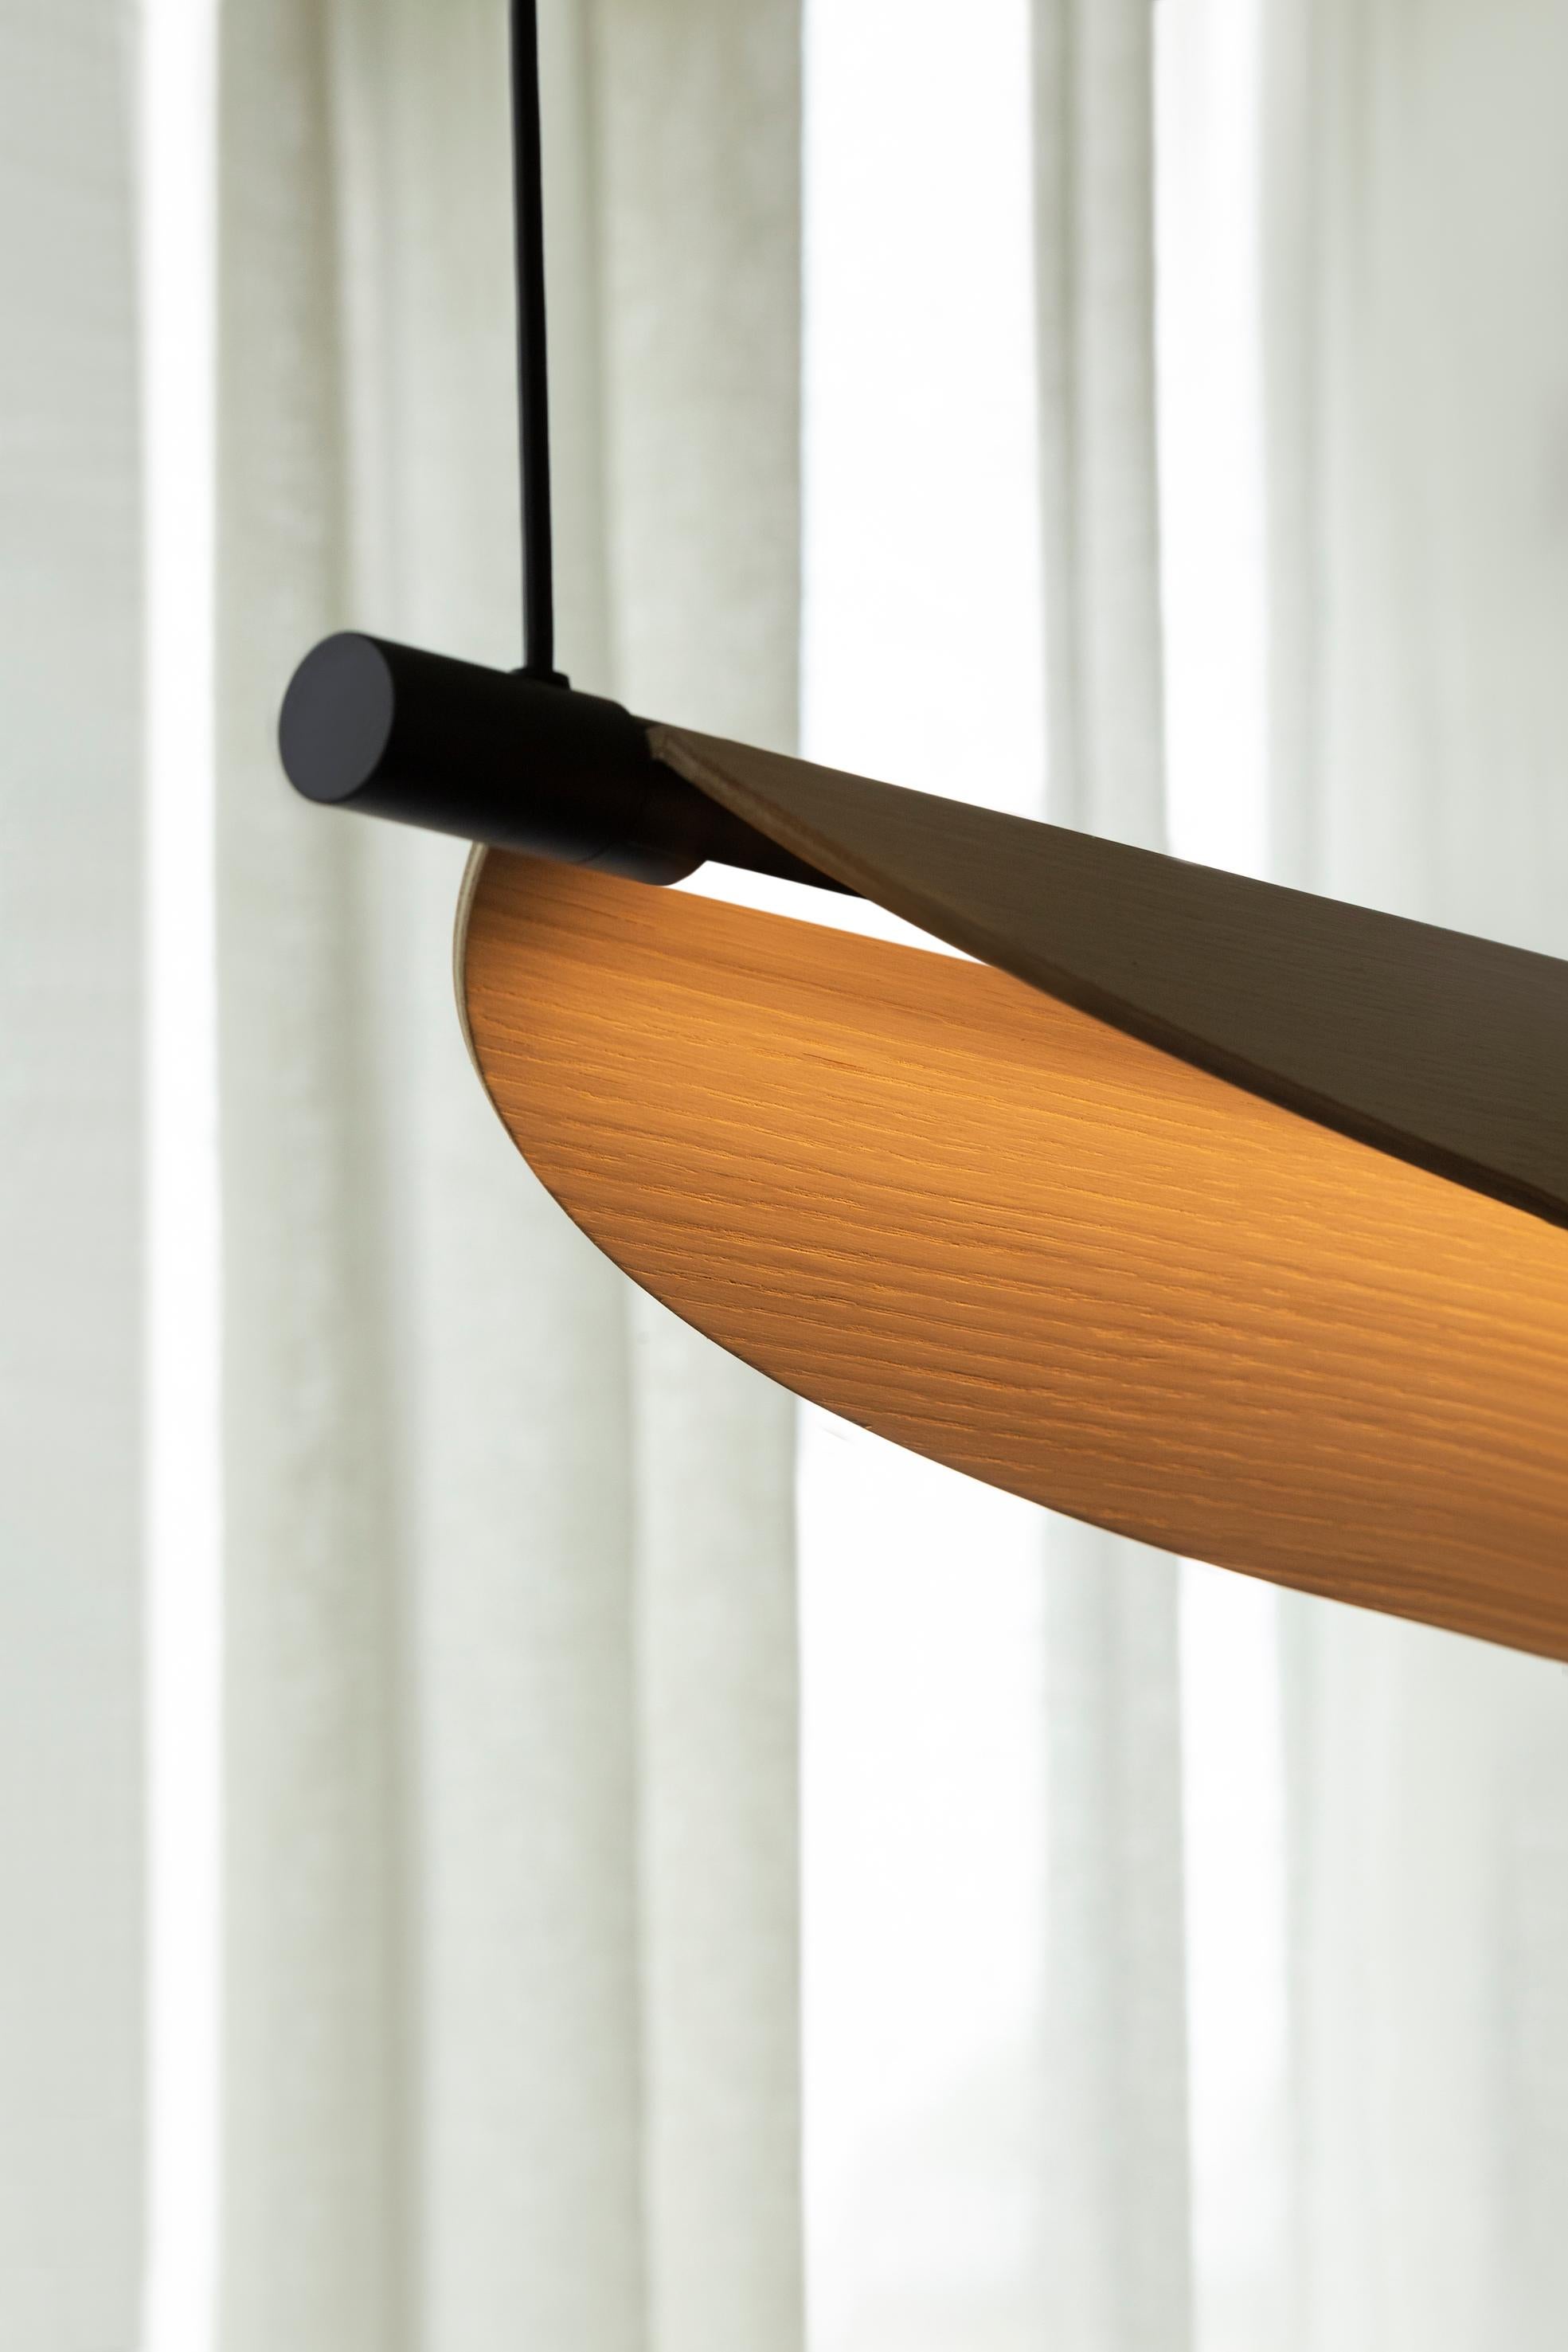 Contemporary Modern Pendant Lamp 'Thula 562.23' by Federica Biasi x Tooy, Black & Light Oak For Sale